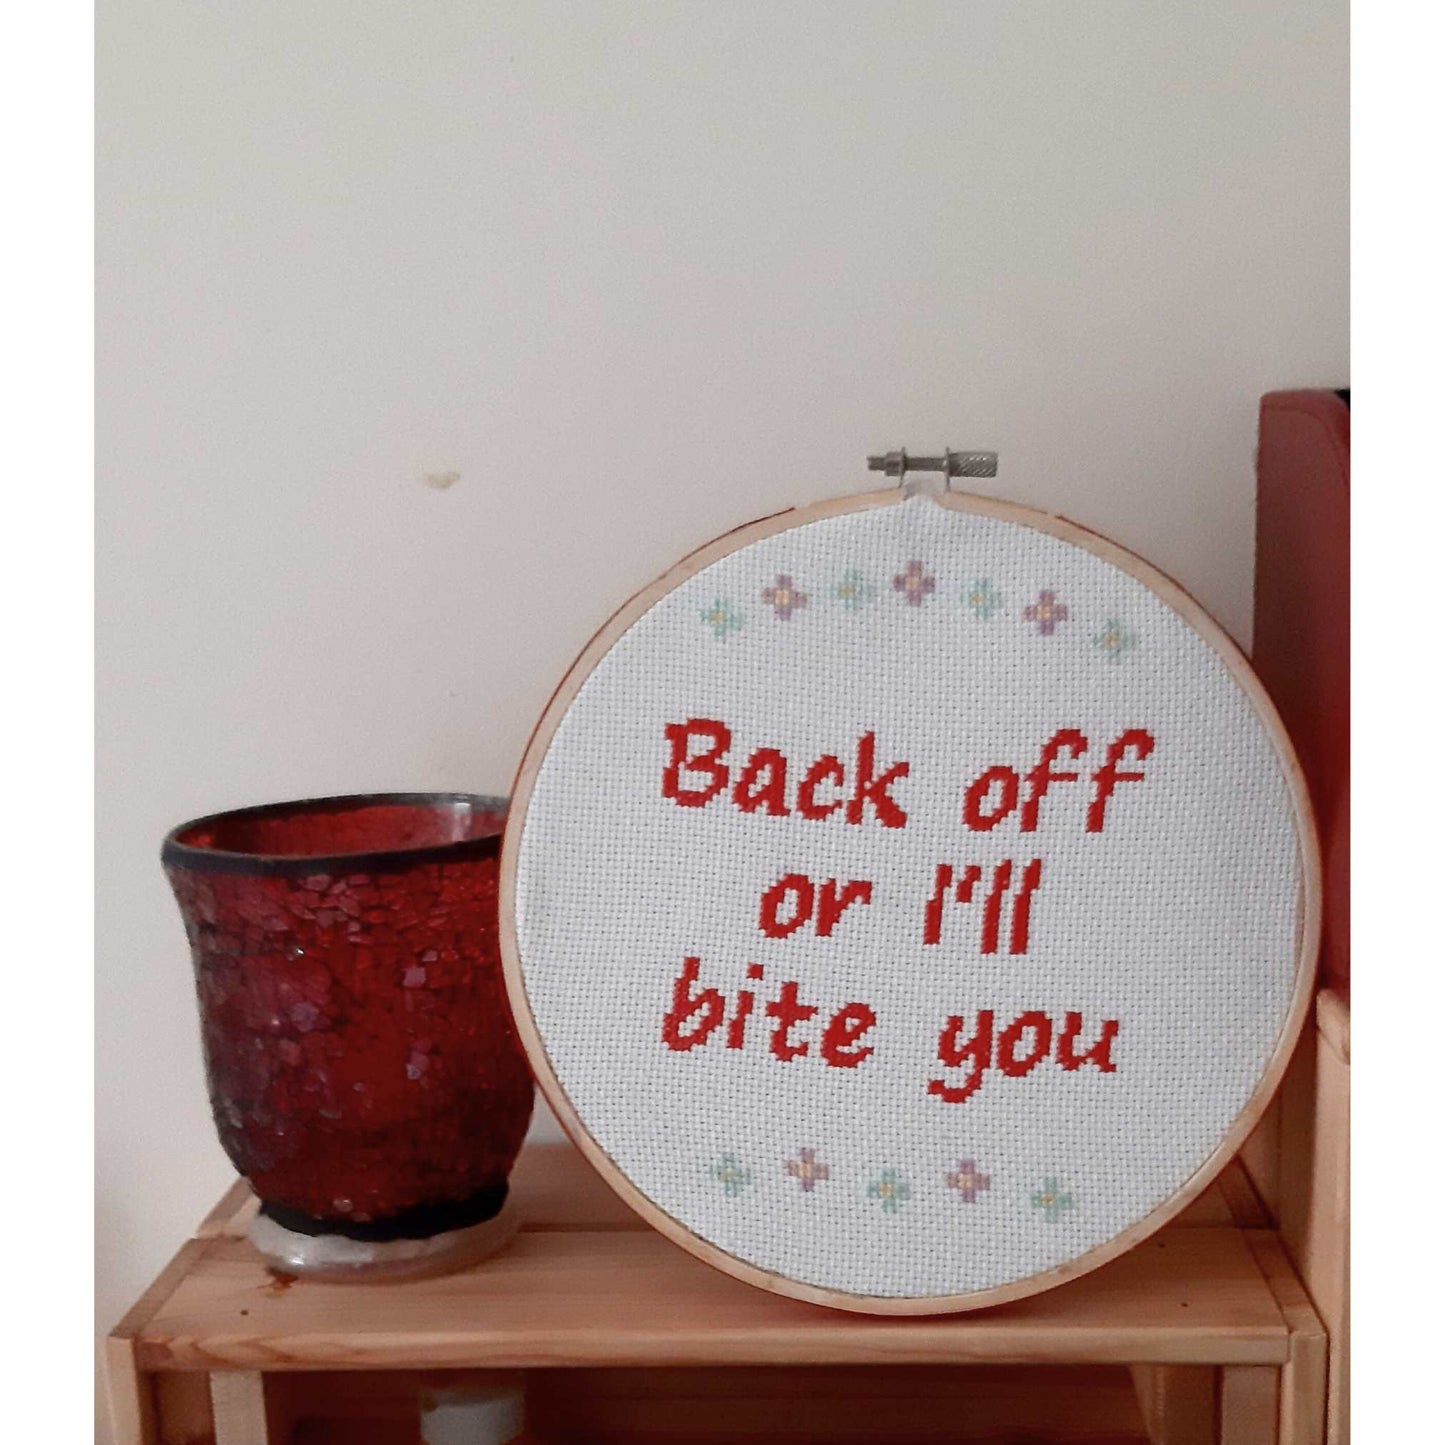 Back off or I'll bite you, completed cross stitch quote